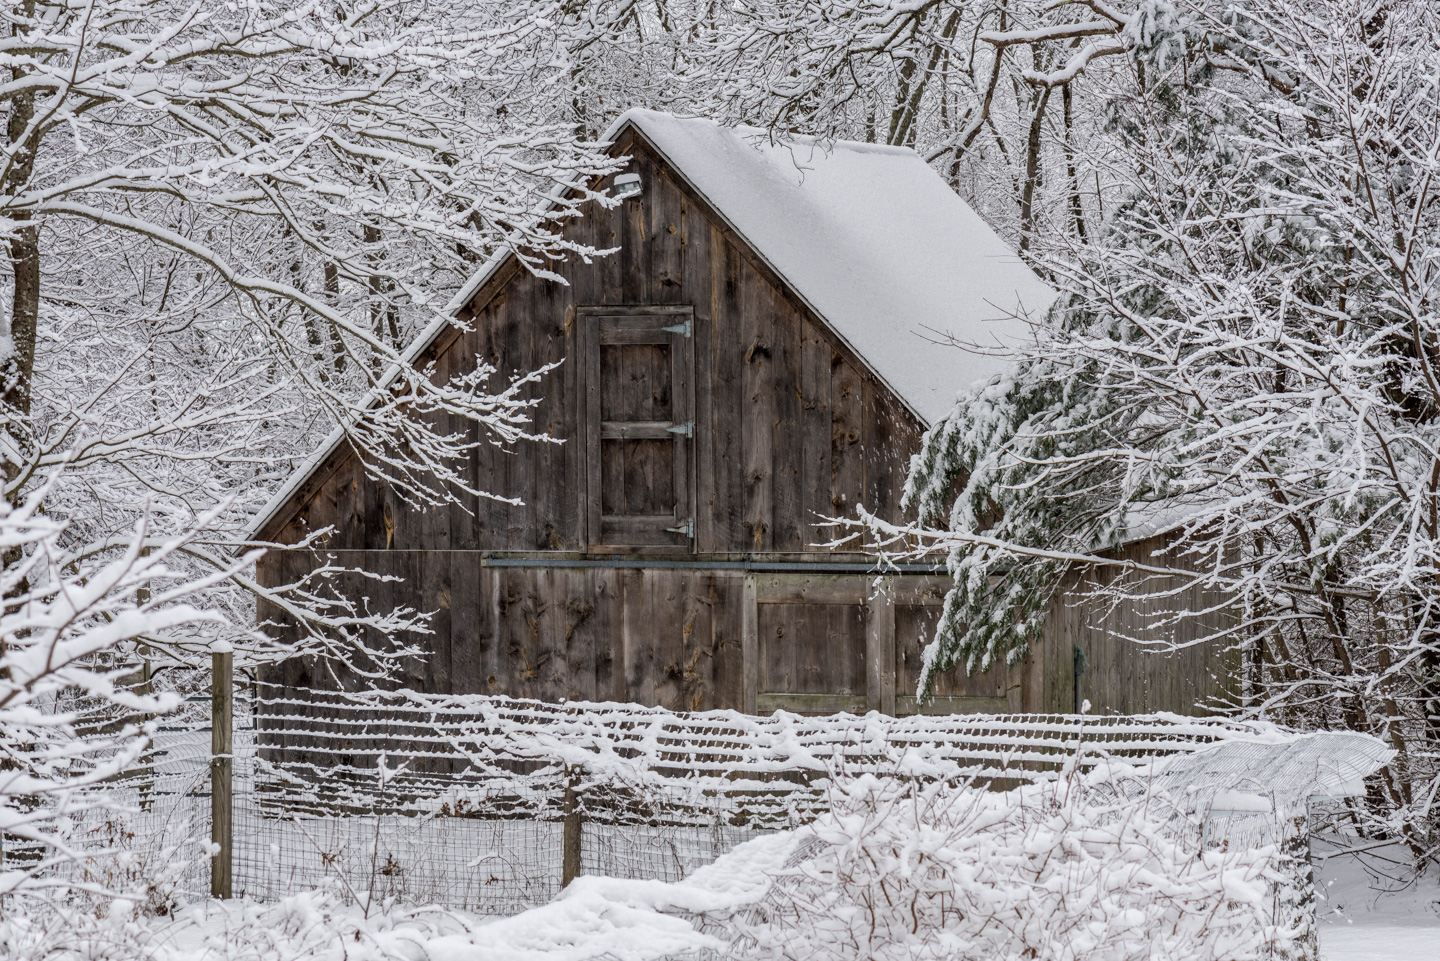 The barn with some snow and the garden fence